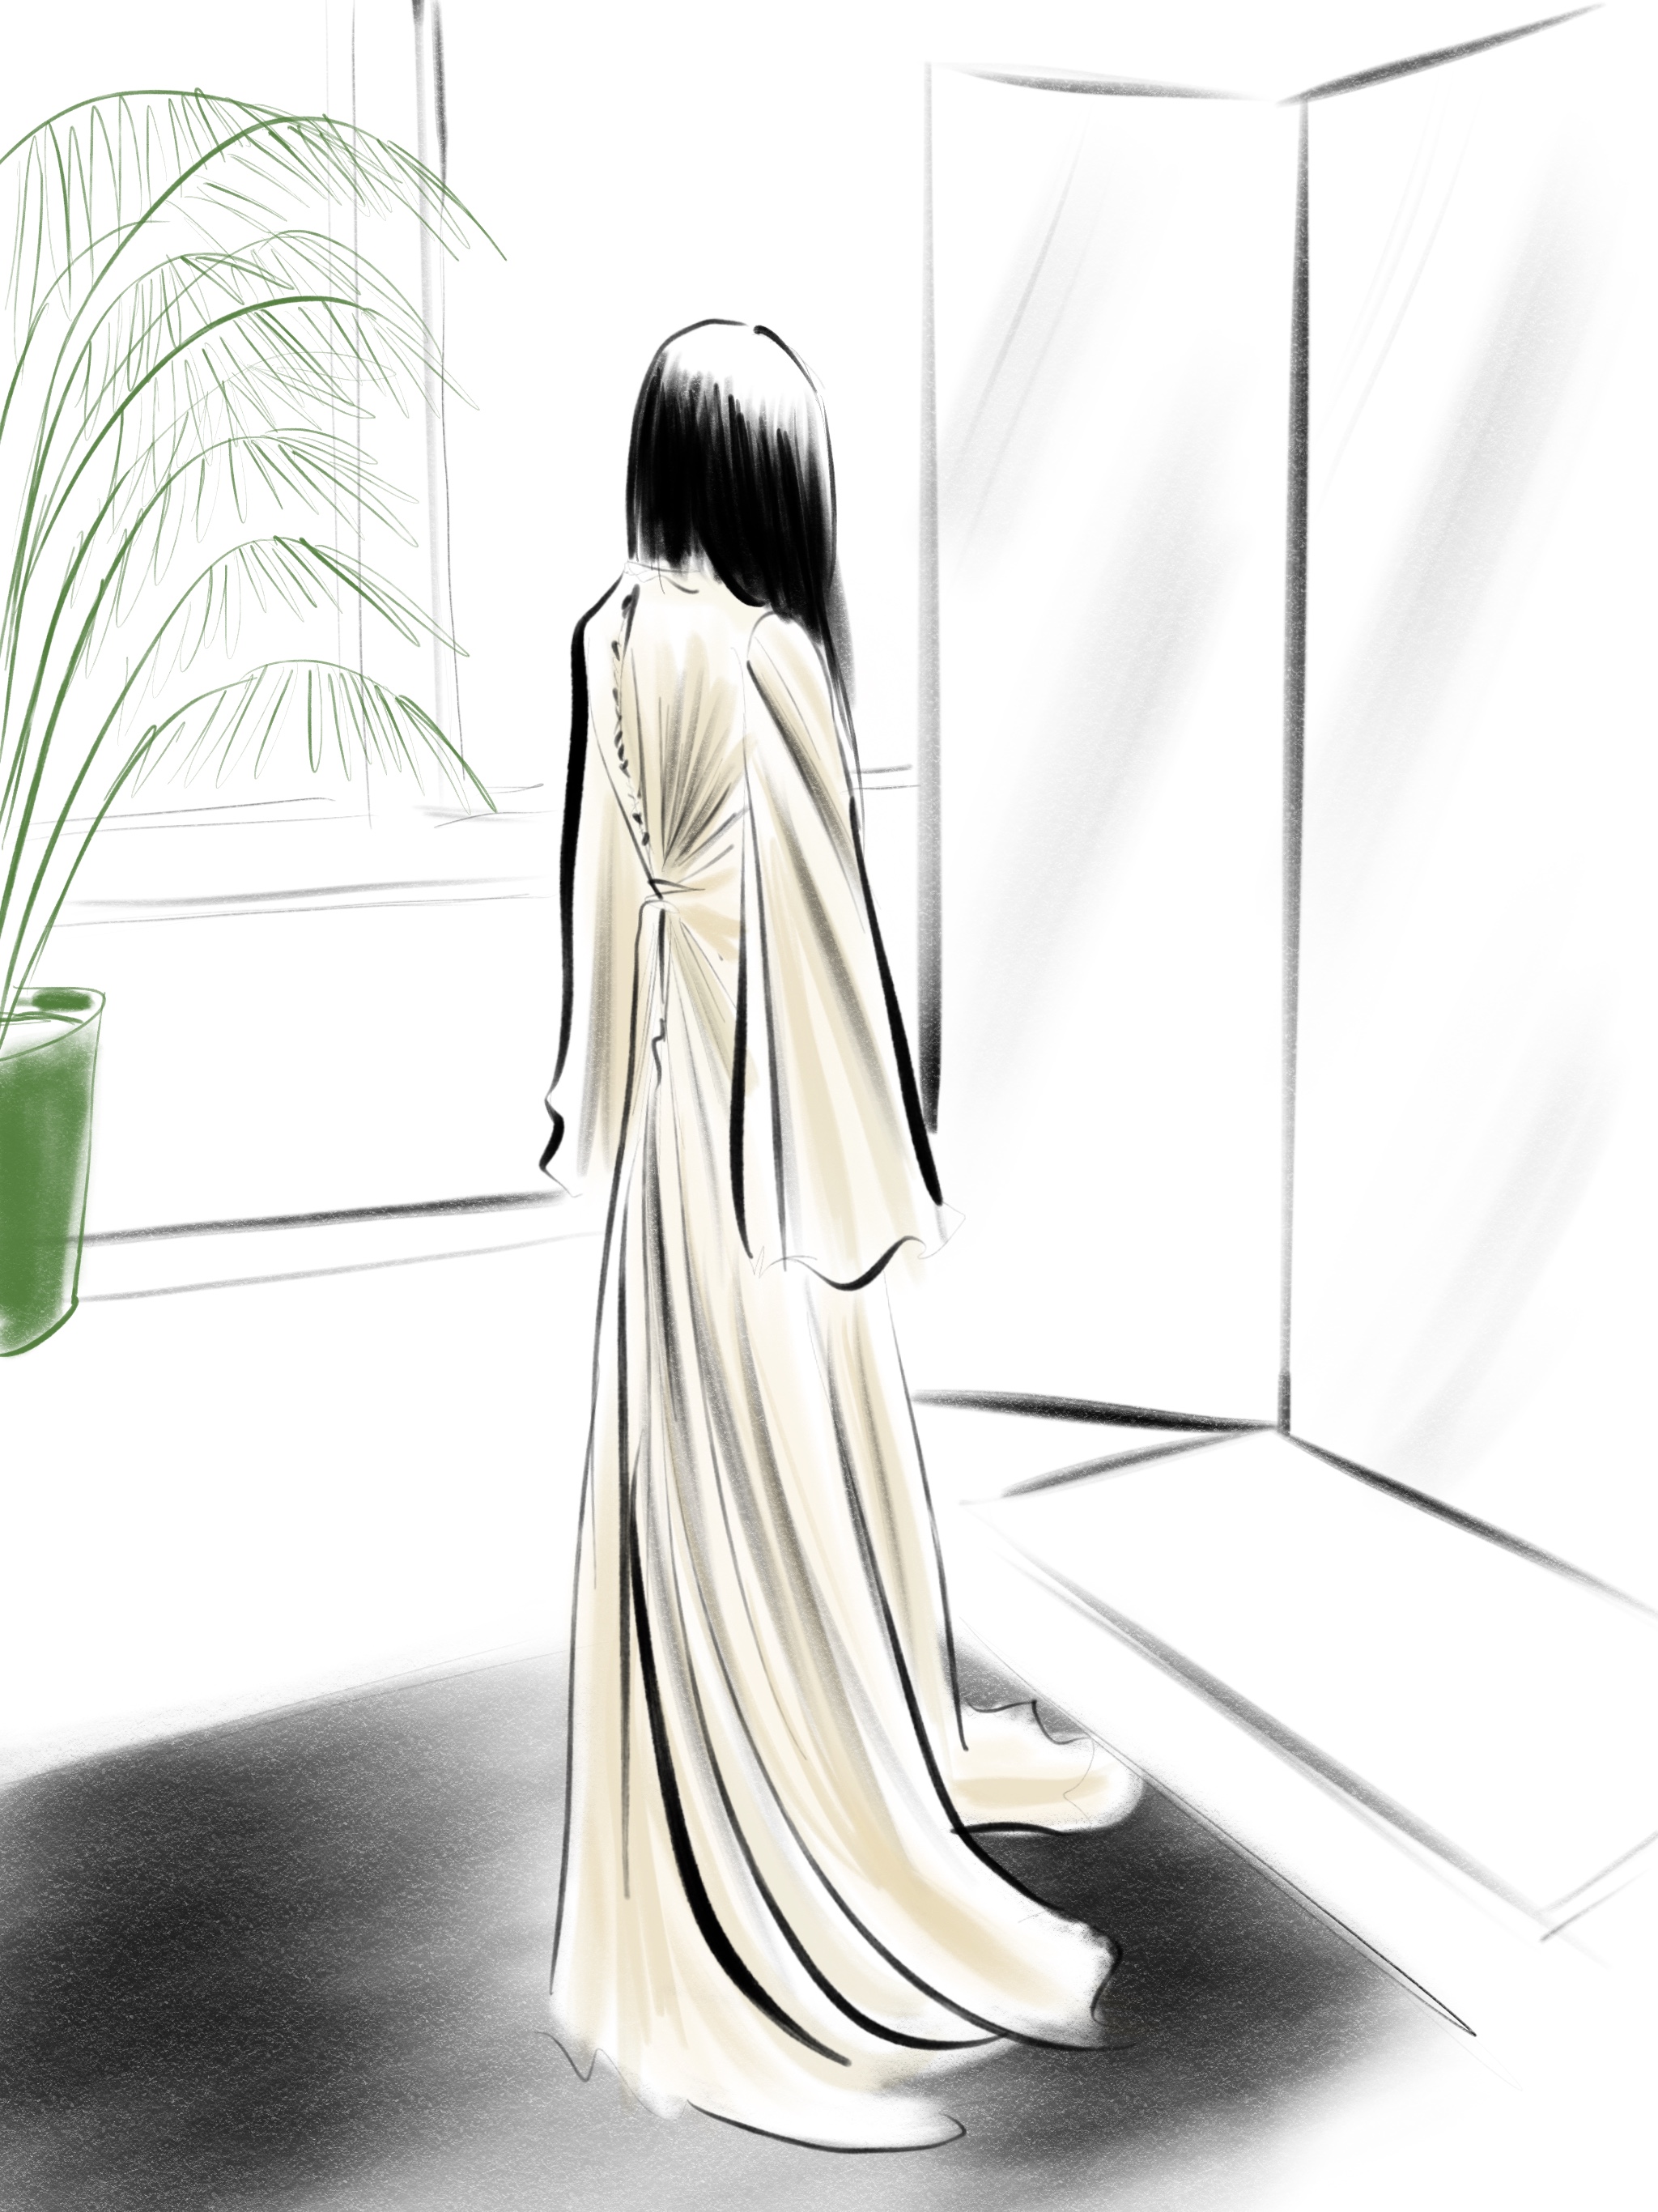 live-drawing-dior 13